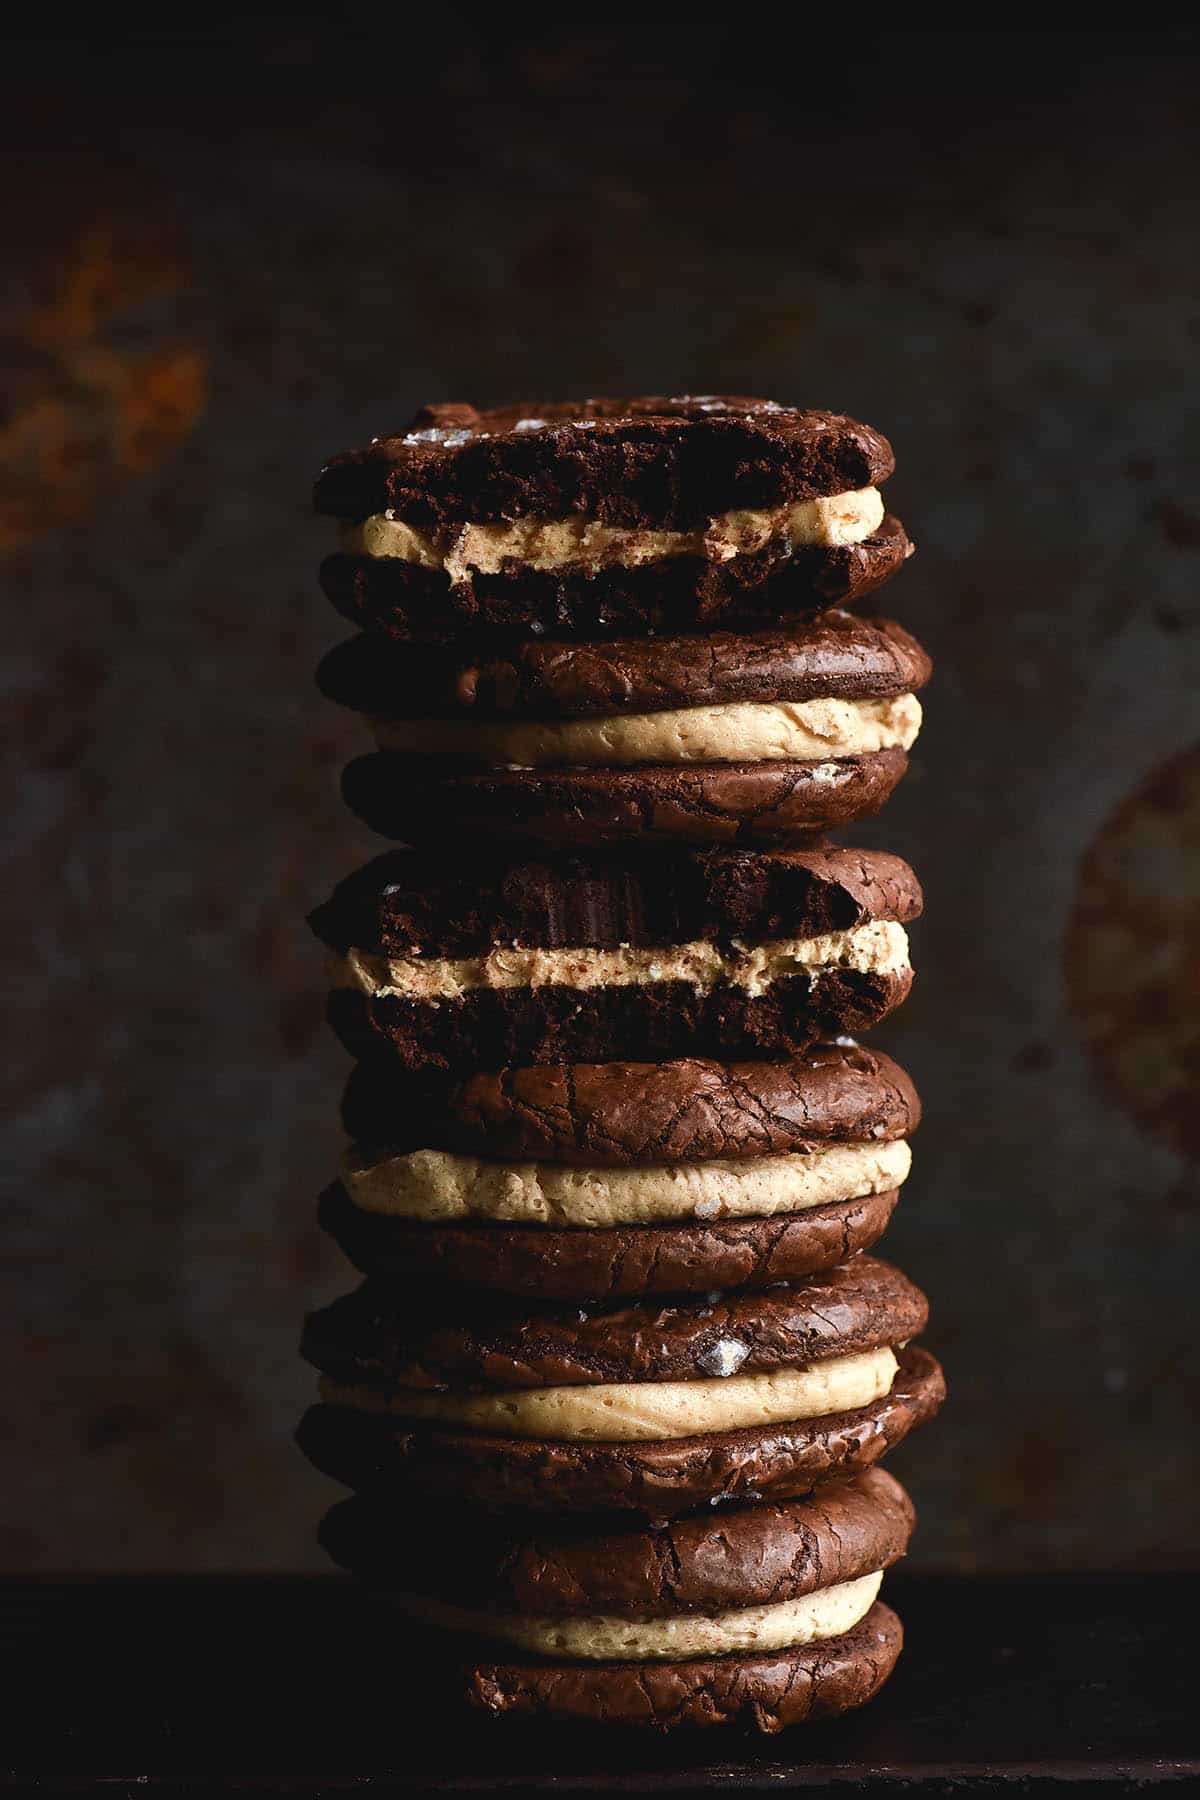 A side on moody shot of a big stack of gluten free brownie cookies made into sandwiches with a brown butter buttercream centre. The pale buttercream and a smattering of sea salt flakes contrast against the moody, rusty dark blue background